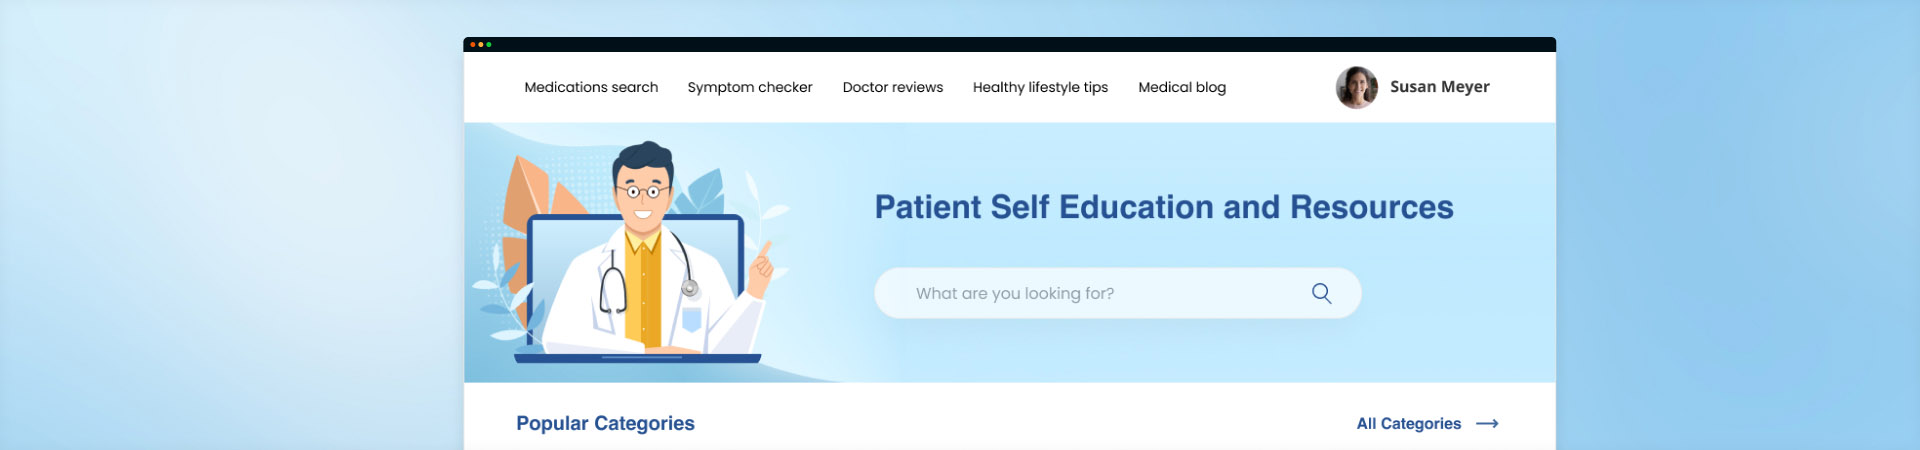 Healthcare Information Portal to Drive Better Care Decisions